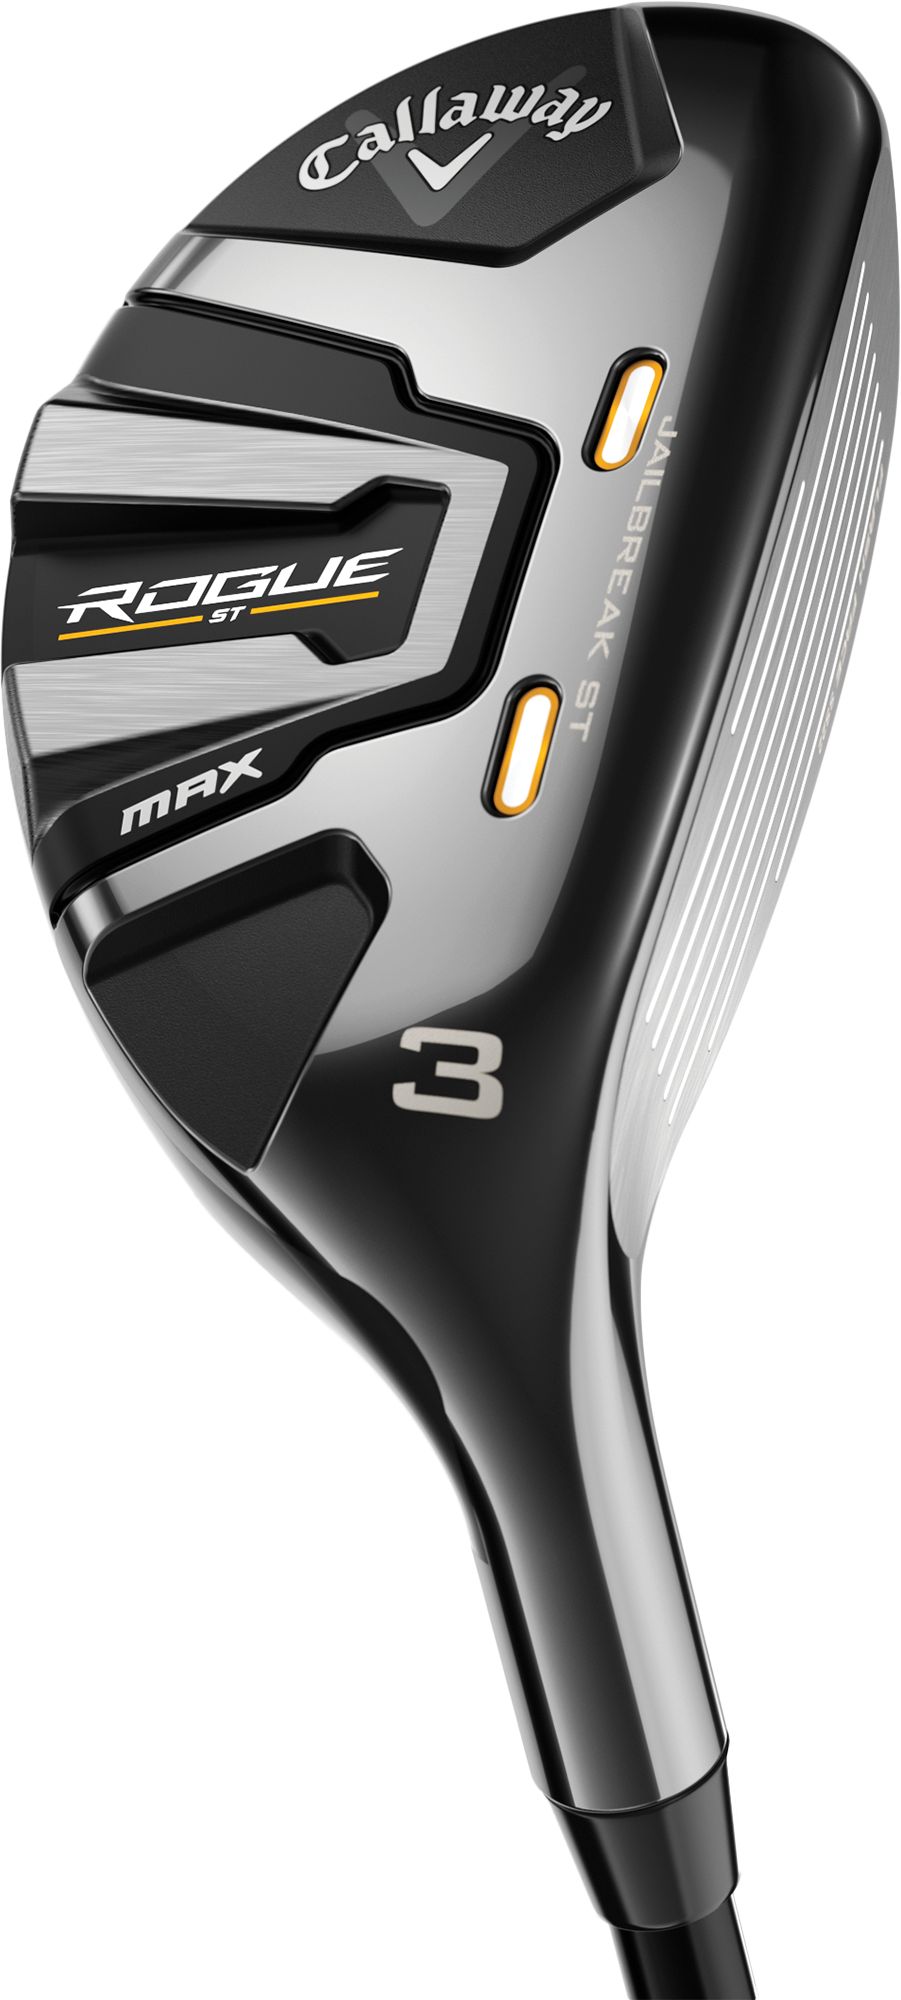 Callaway Rogue ST MAX Hybrid - Used Demo, Men's $179.99+tax & Free Shipping